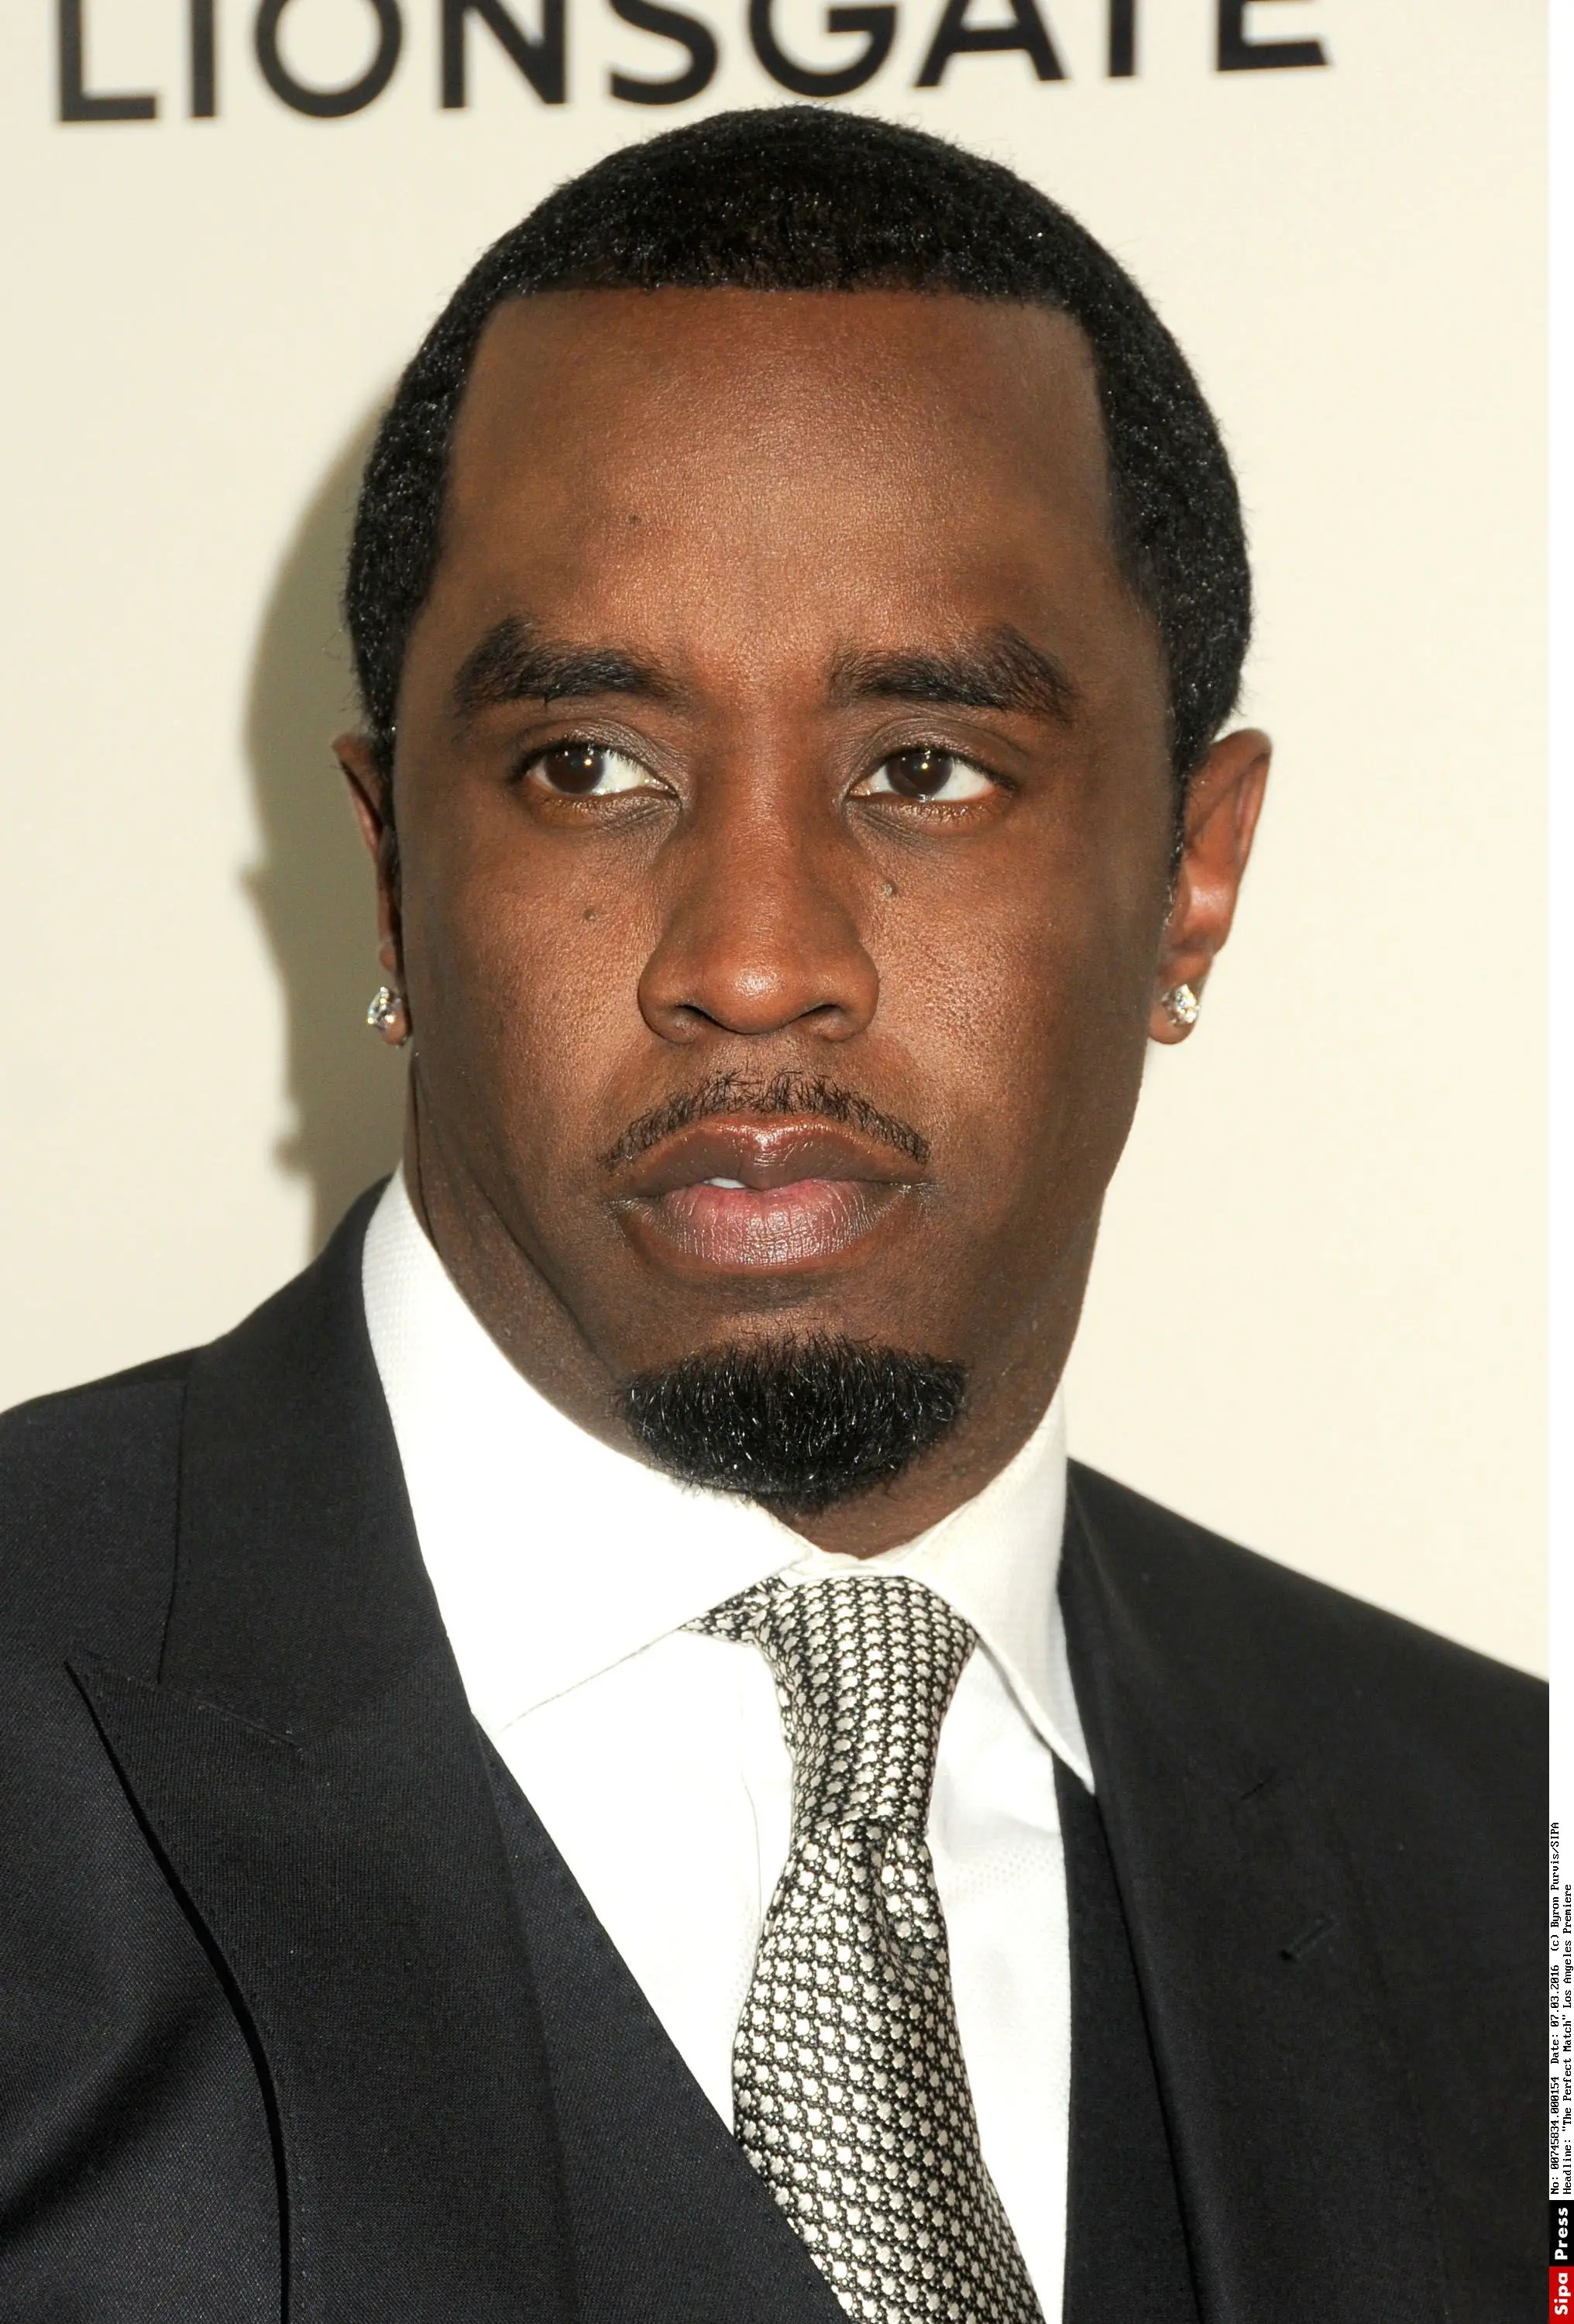 How tall is P Diddy?